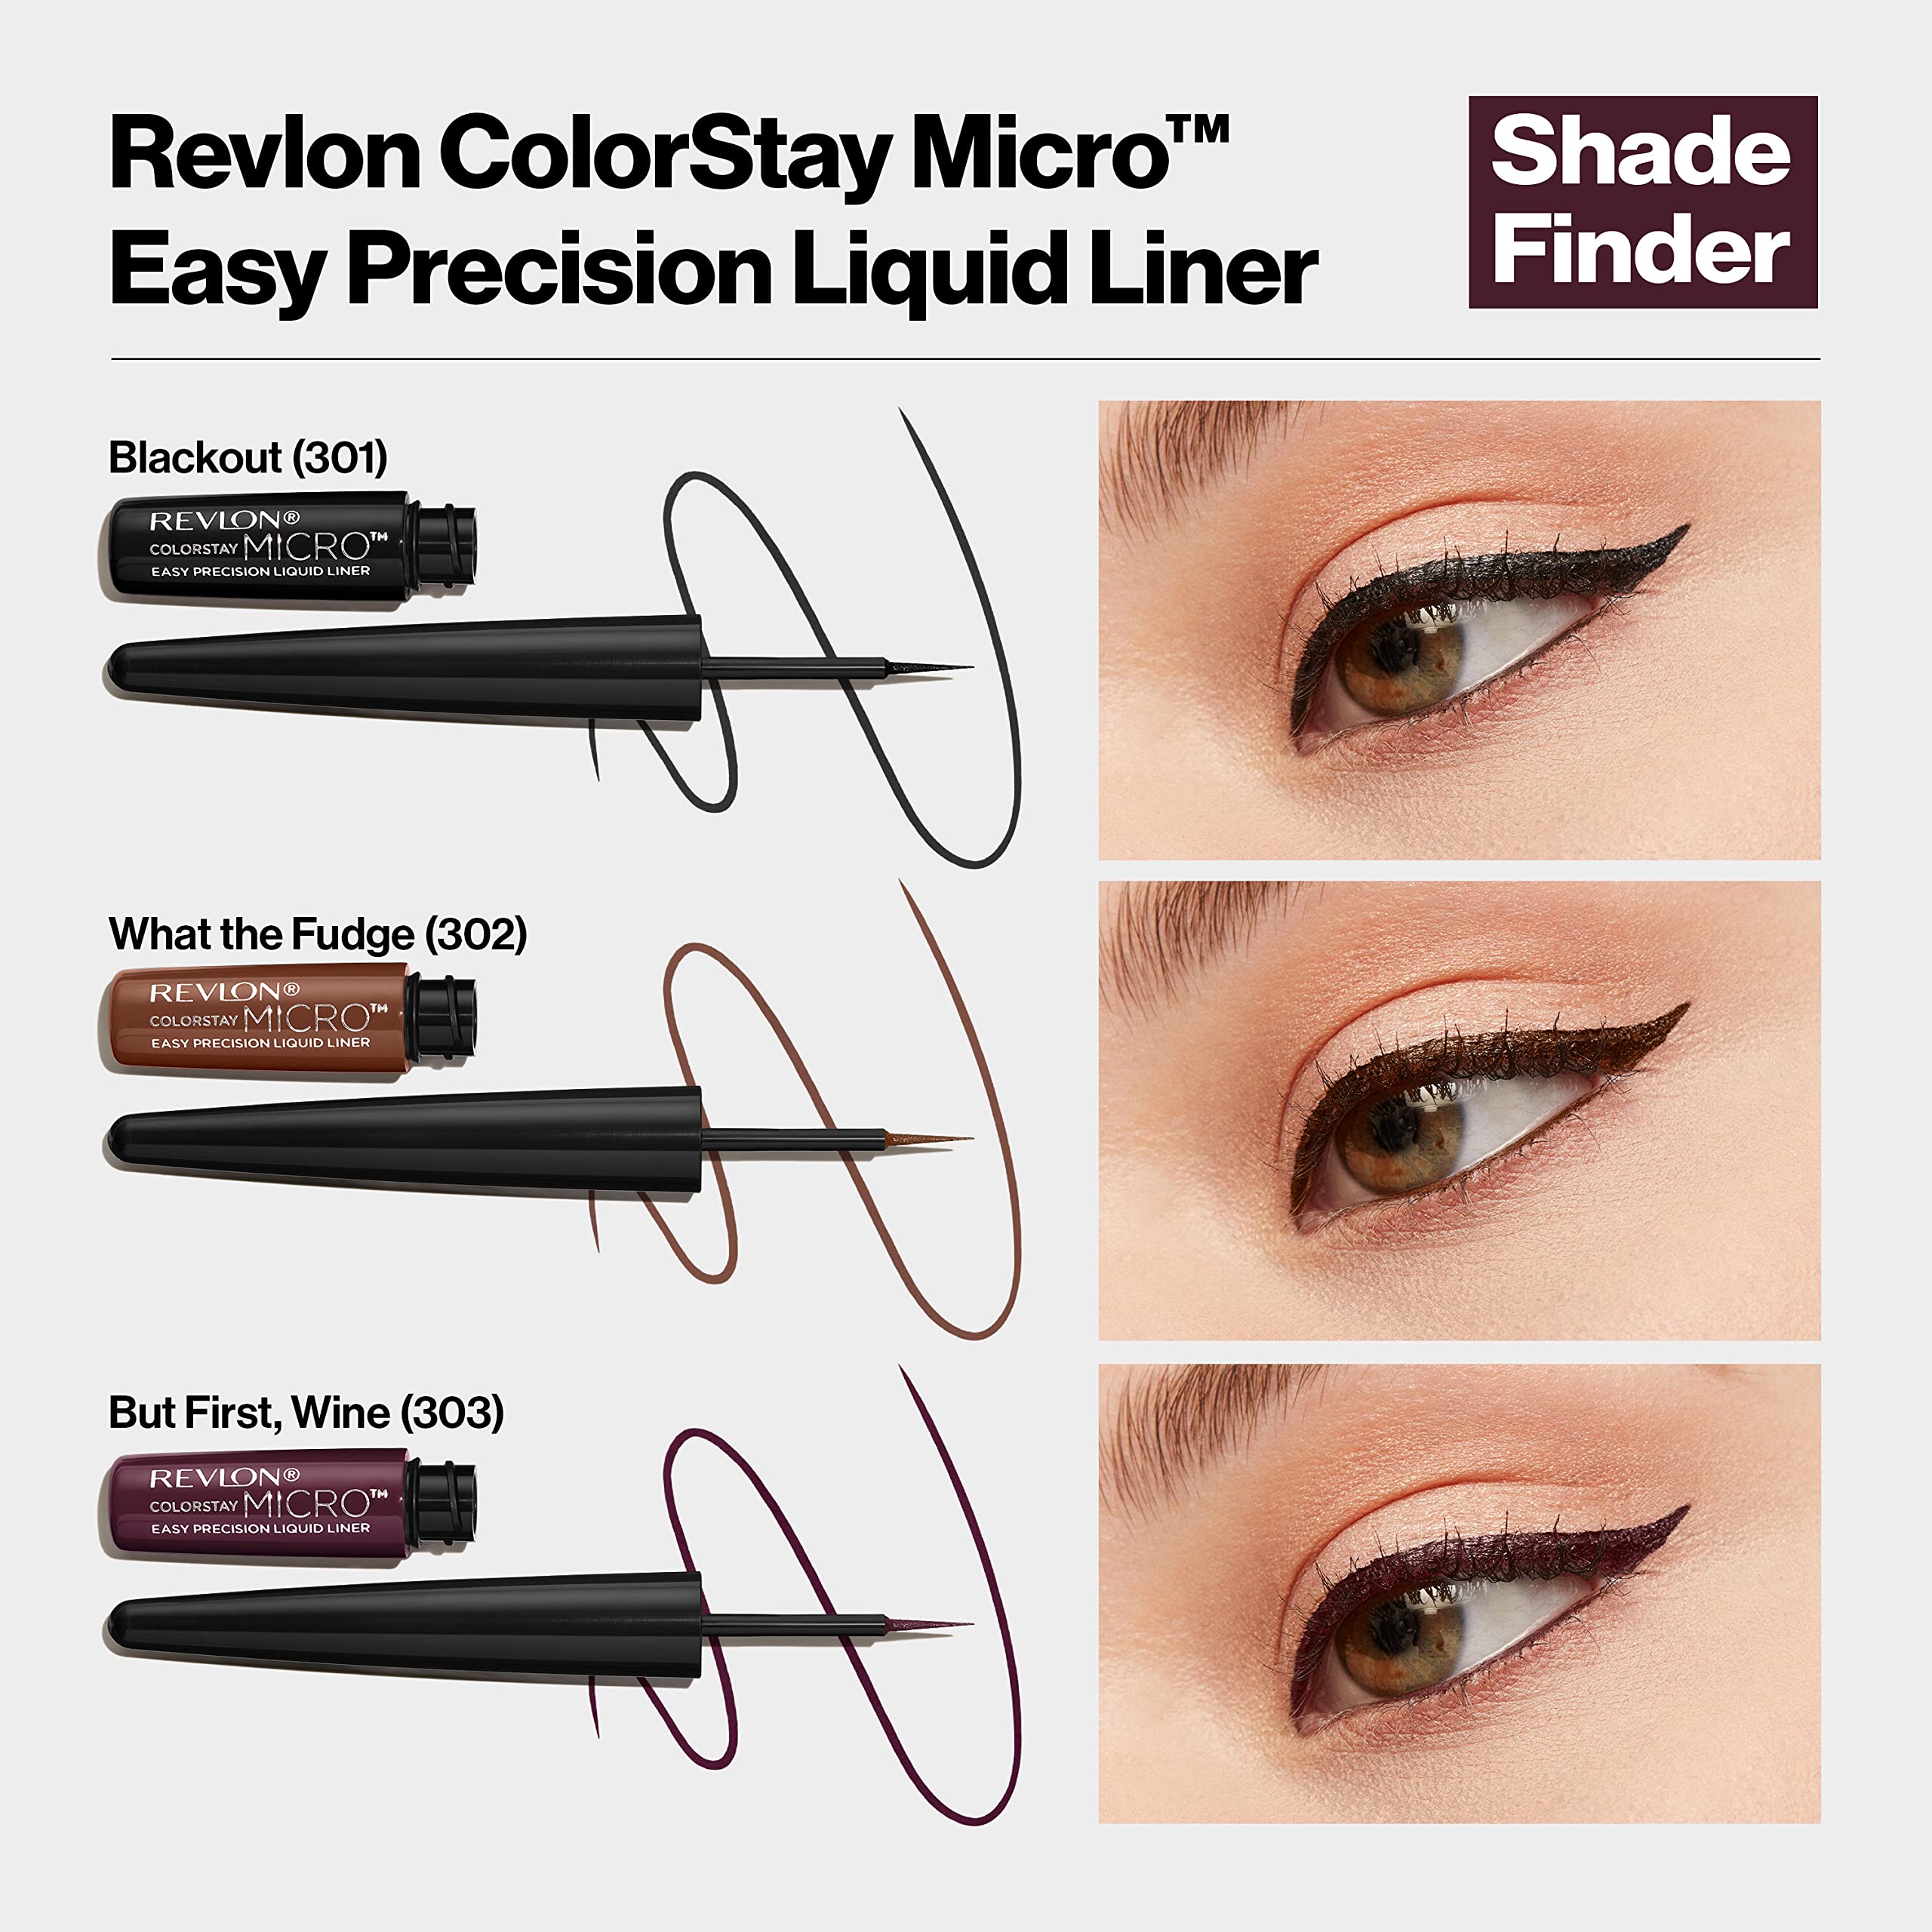 REVLON ColorStay Micro Easy Precision Liquid Liner, 301 Blackout (Pack of 1)